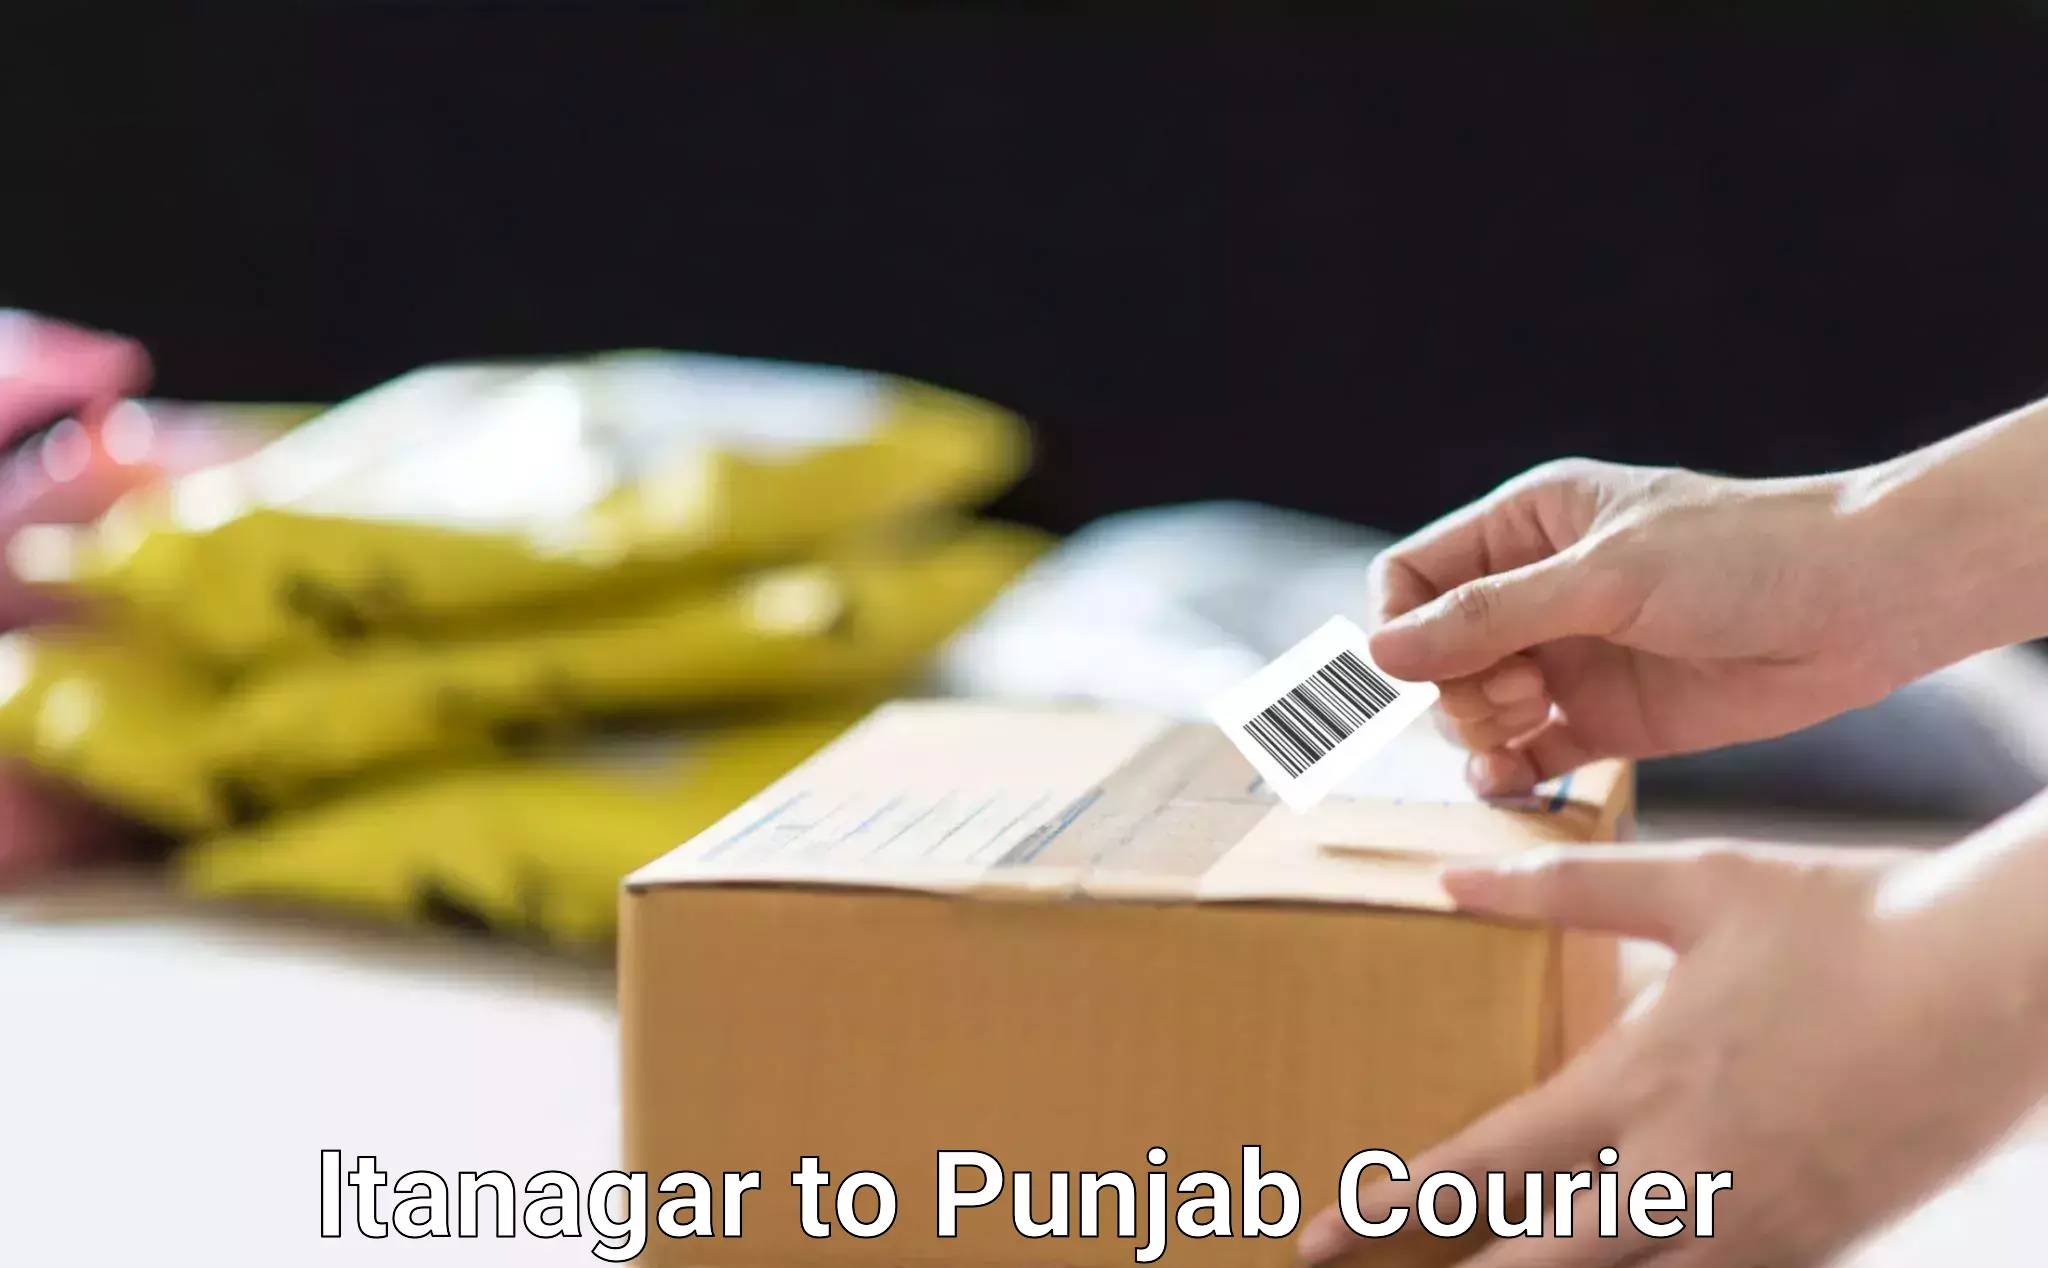 State-of-the-art courier technology Itanagar to Bathinda